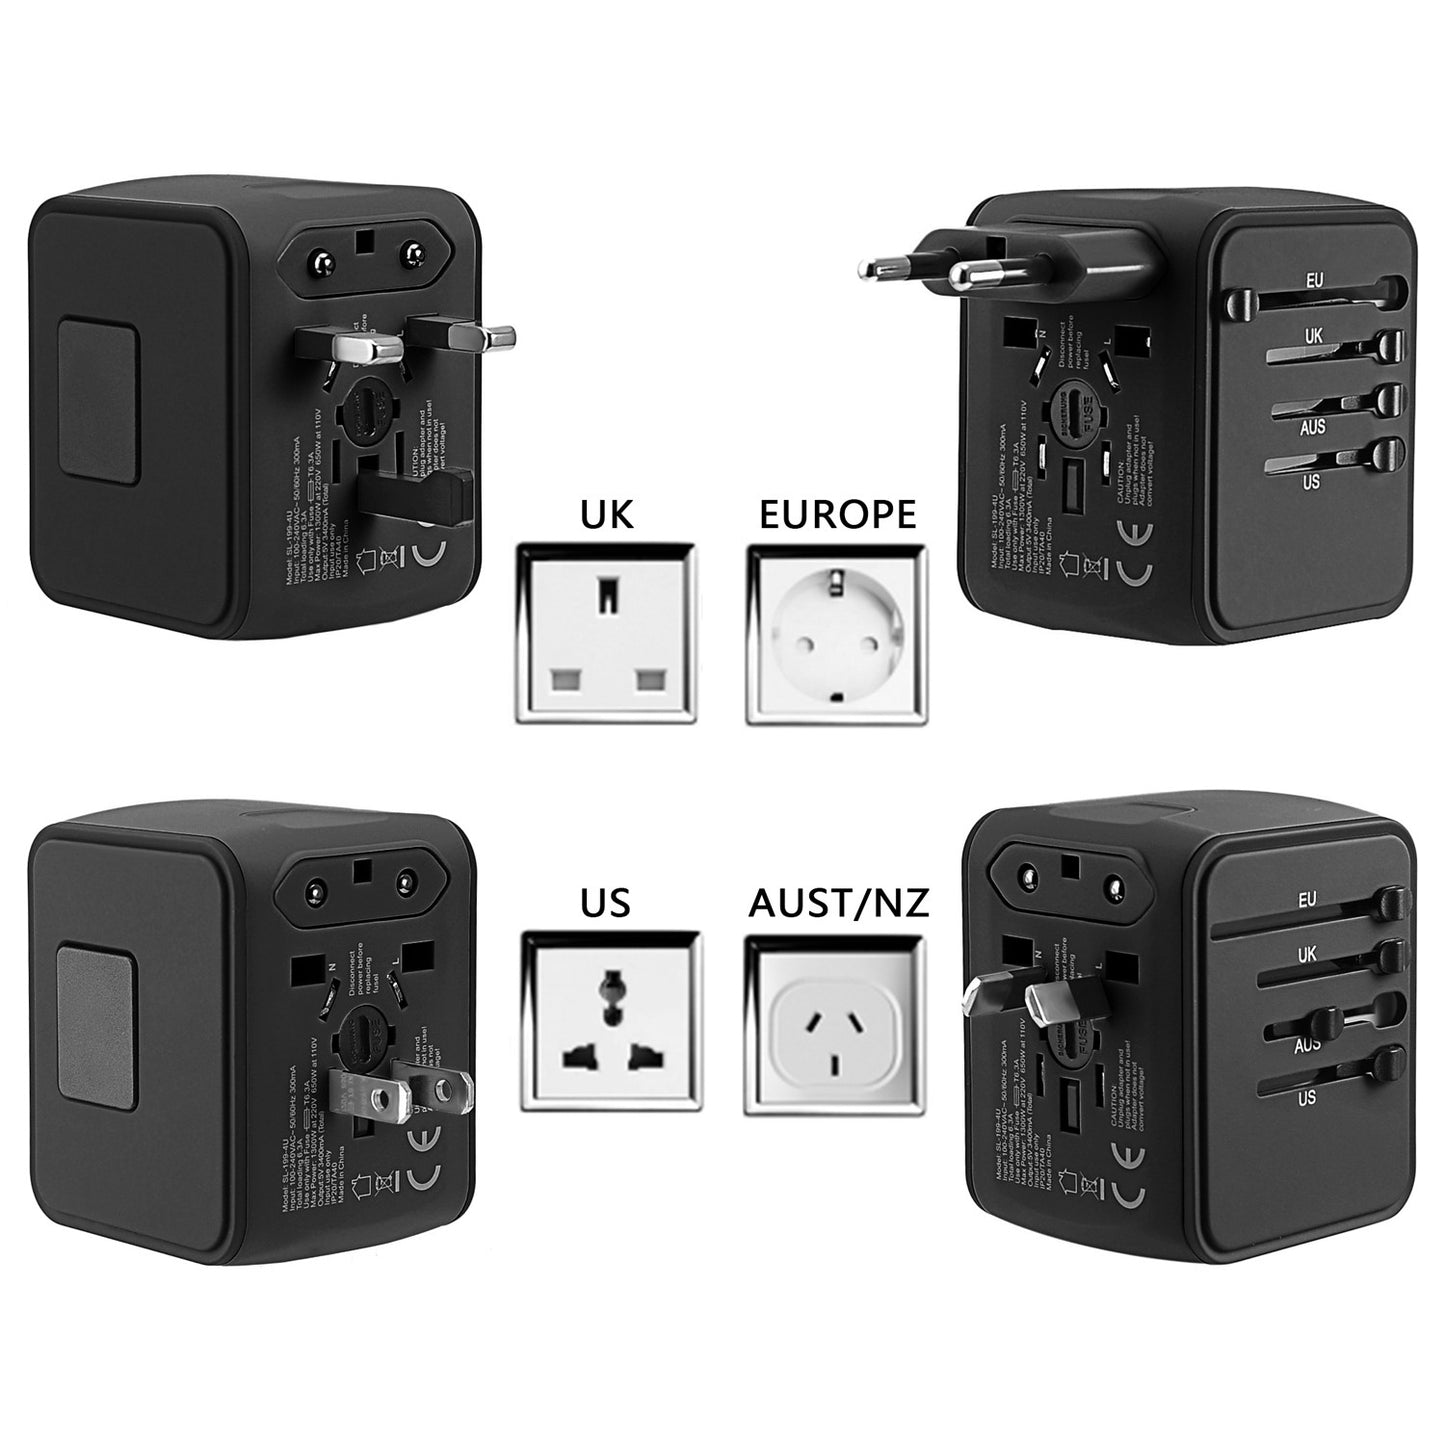 International Travel Adapter Universal Power Adapter Worldwide All in One 4 USB with Electrical Plug Perfect for European US, EU, UK, AU 160 Countries (Black)